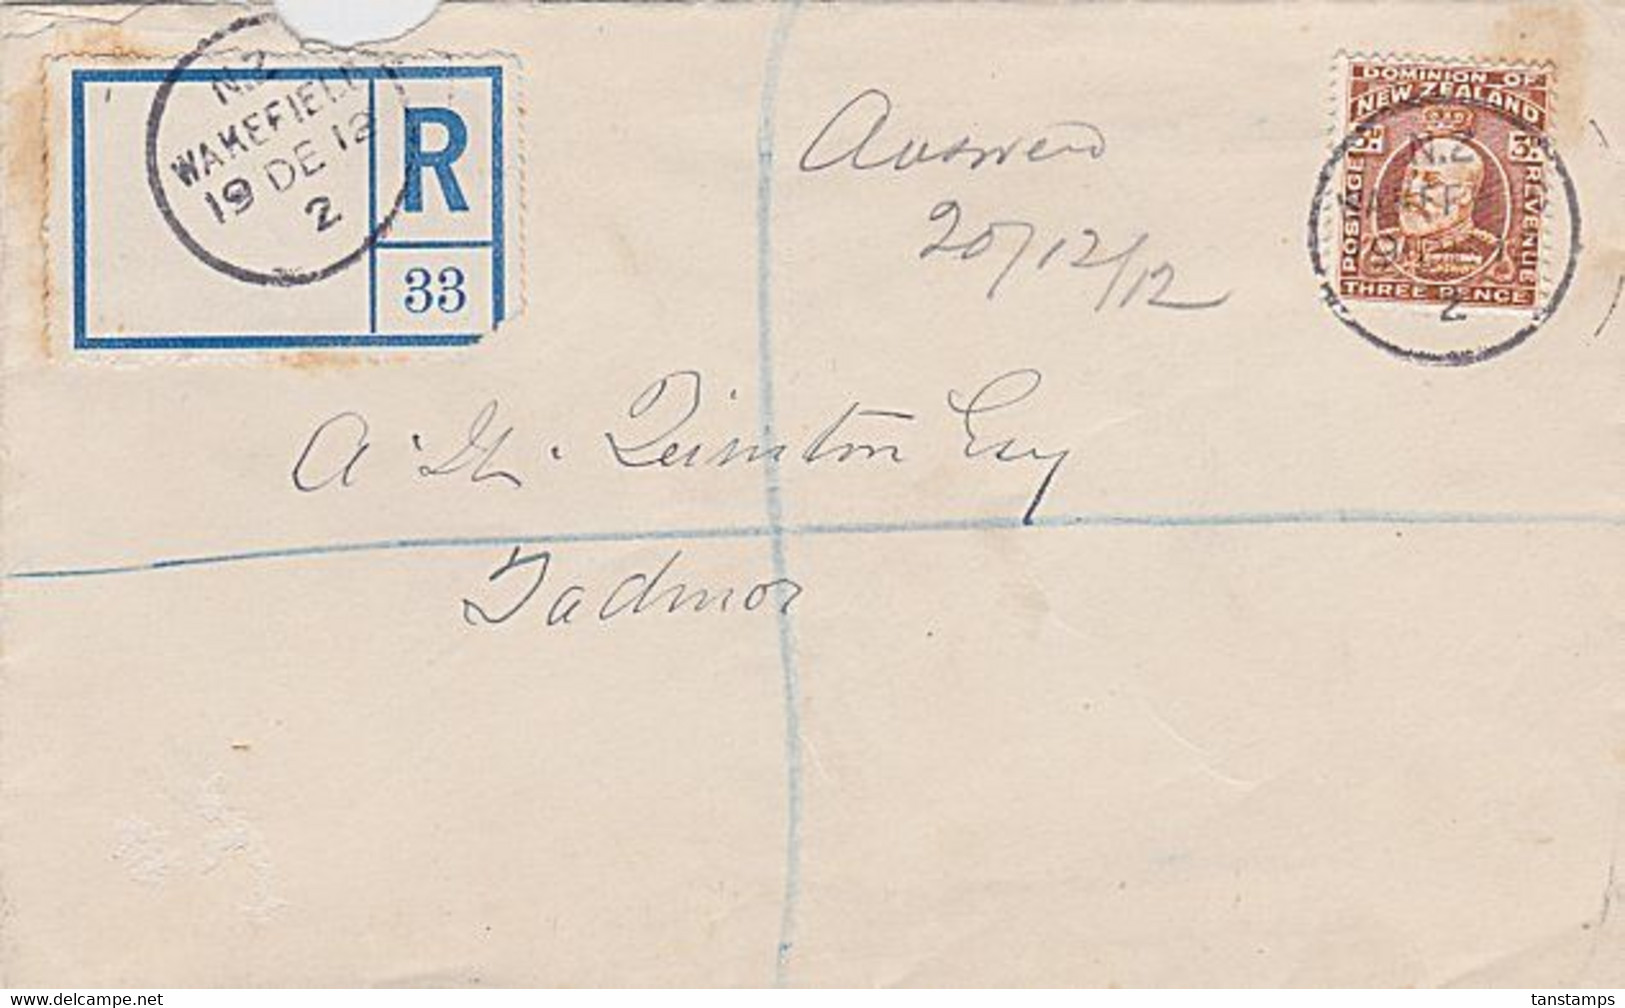 NEW ZEALAND 1912 REGISTERED COVER 3d KEVII SOLO FRANKING WAKEFIELD A-CLASS CDS - Storia Postale